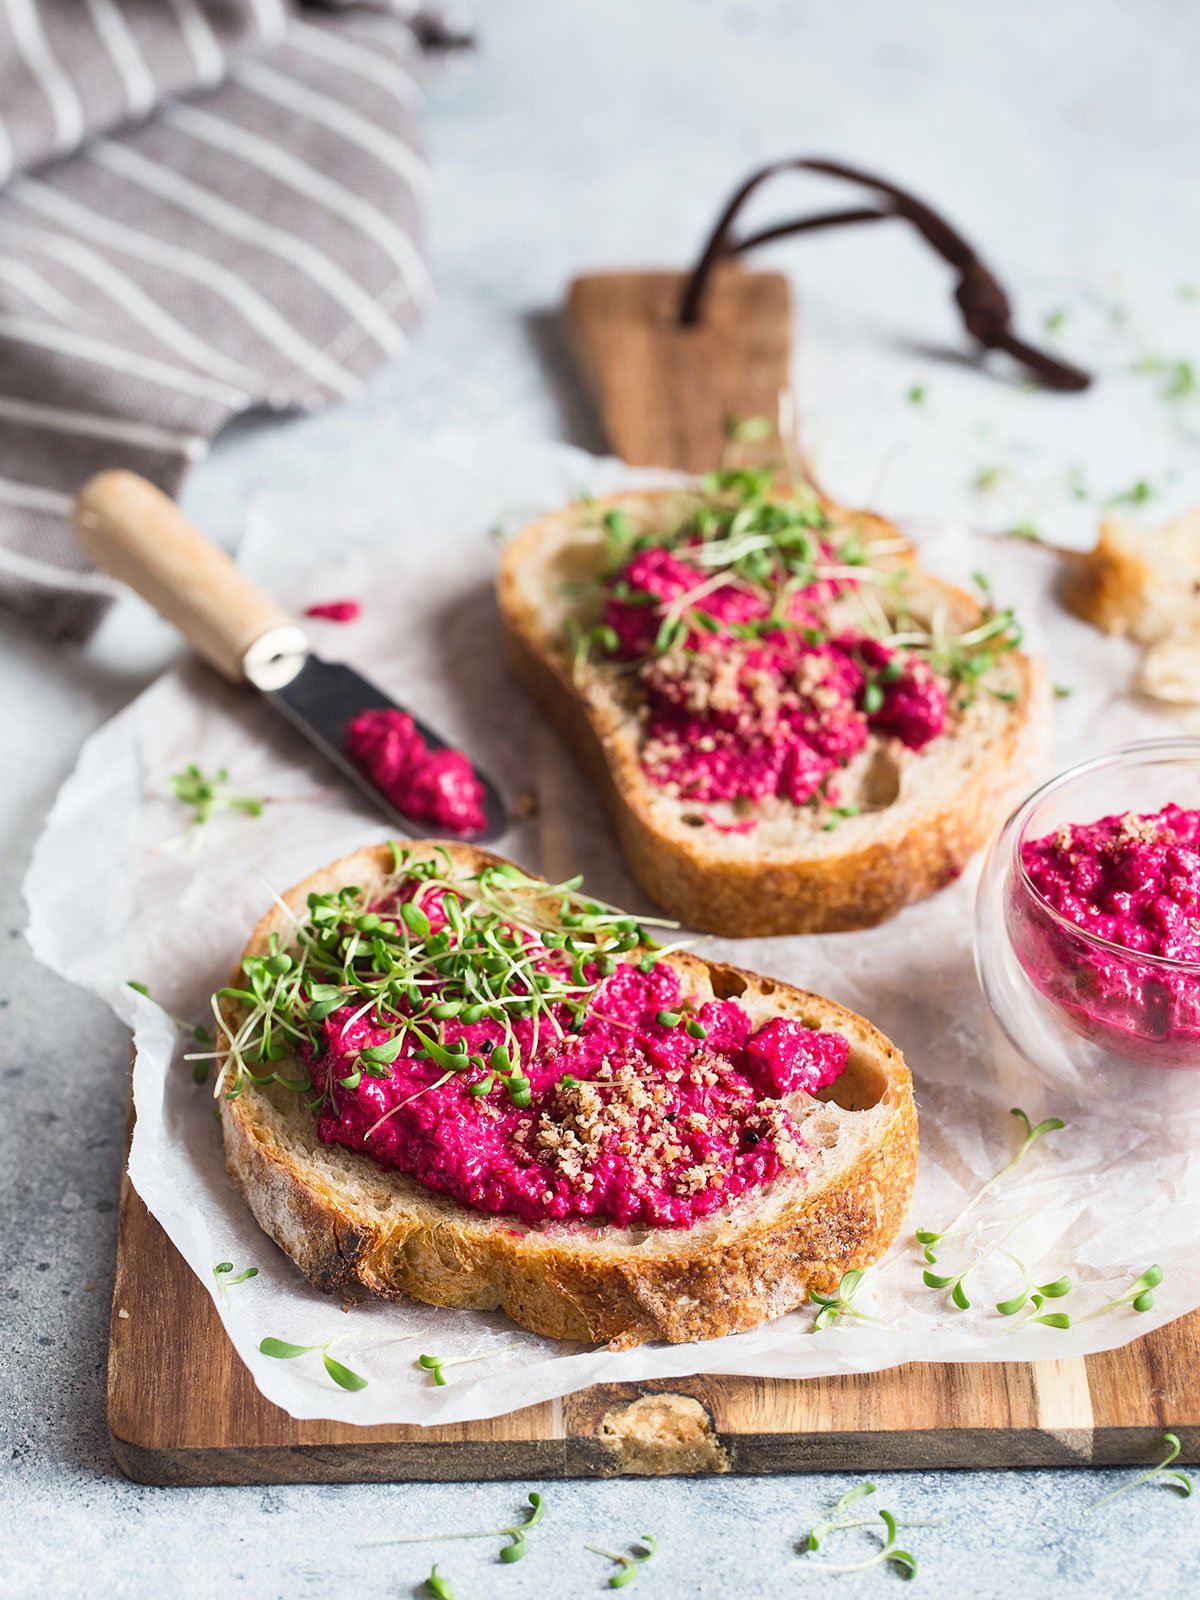 Bread with Beetroot Hummus